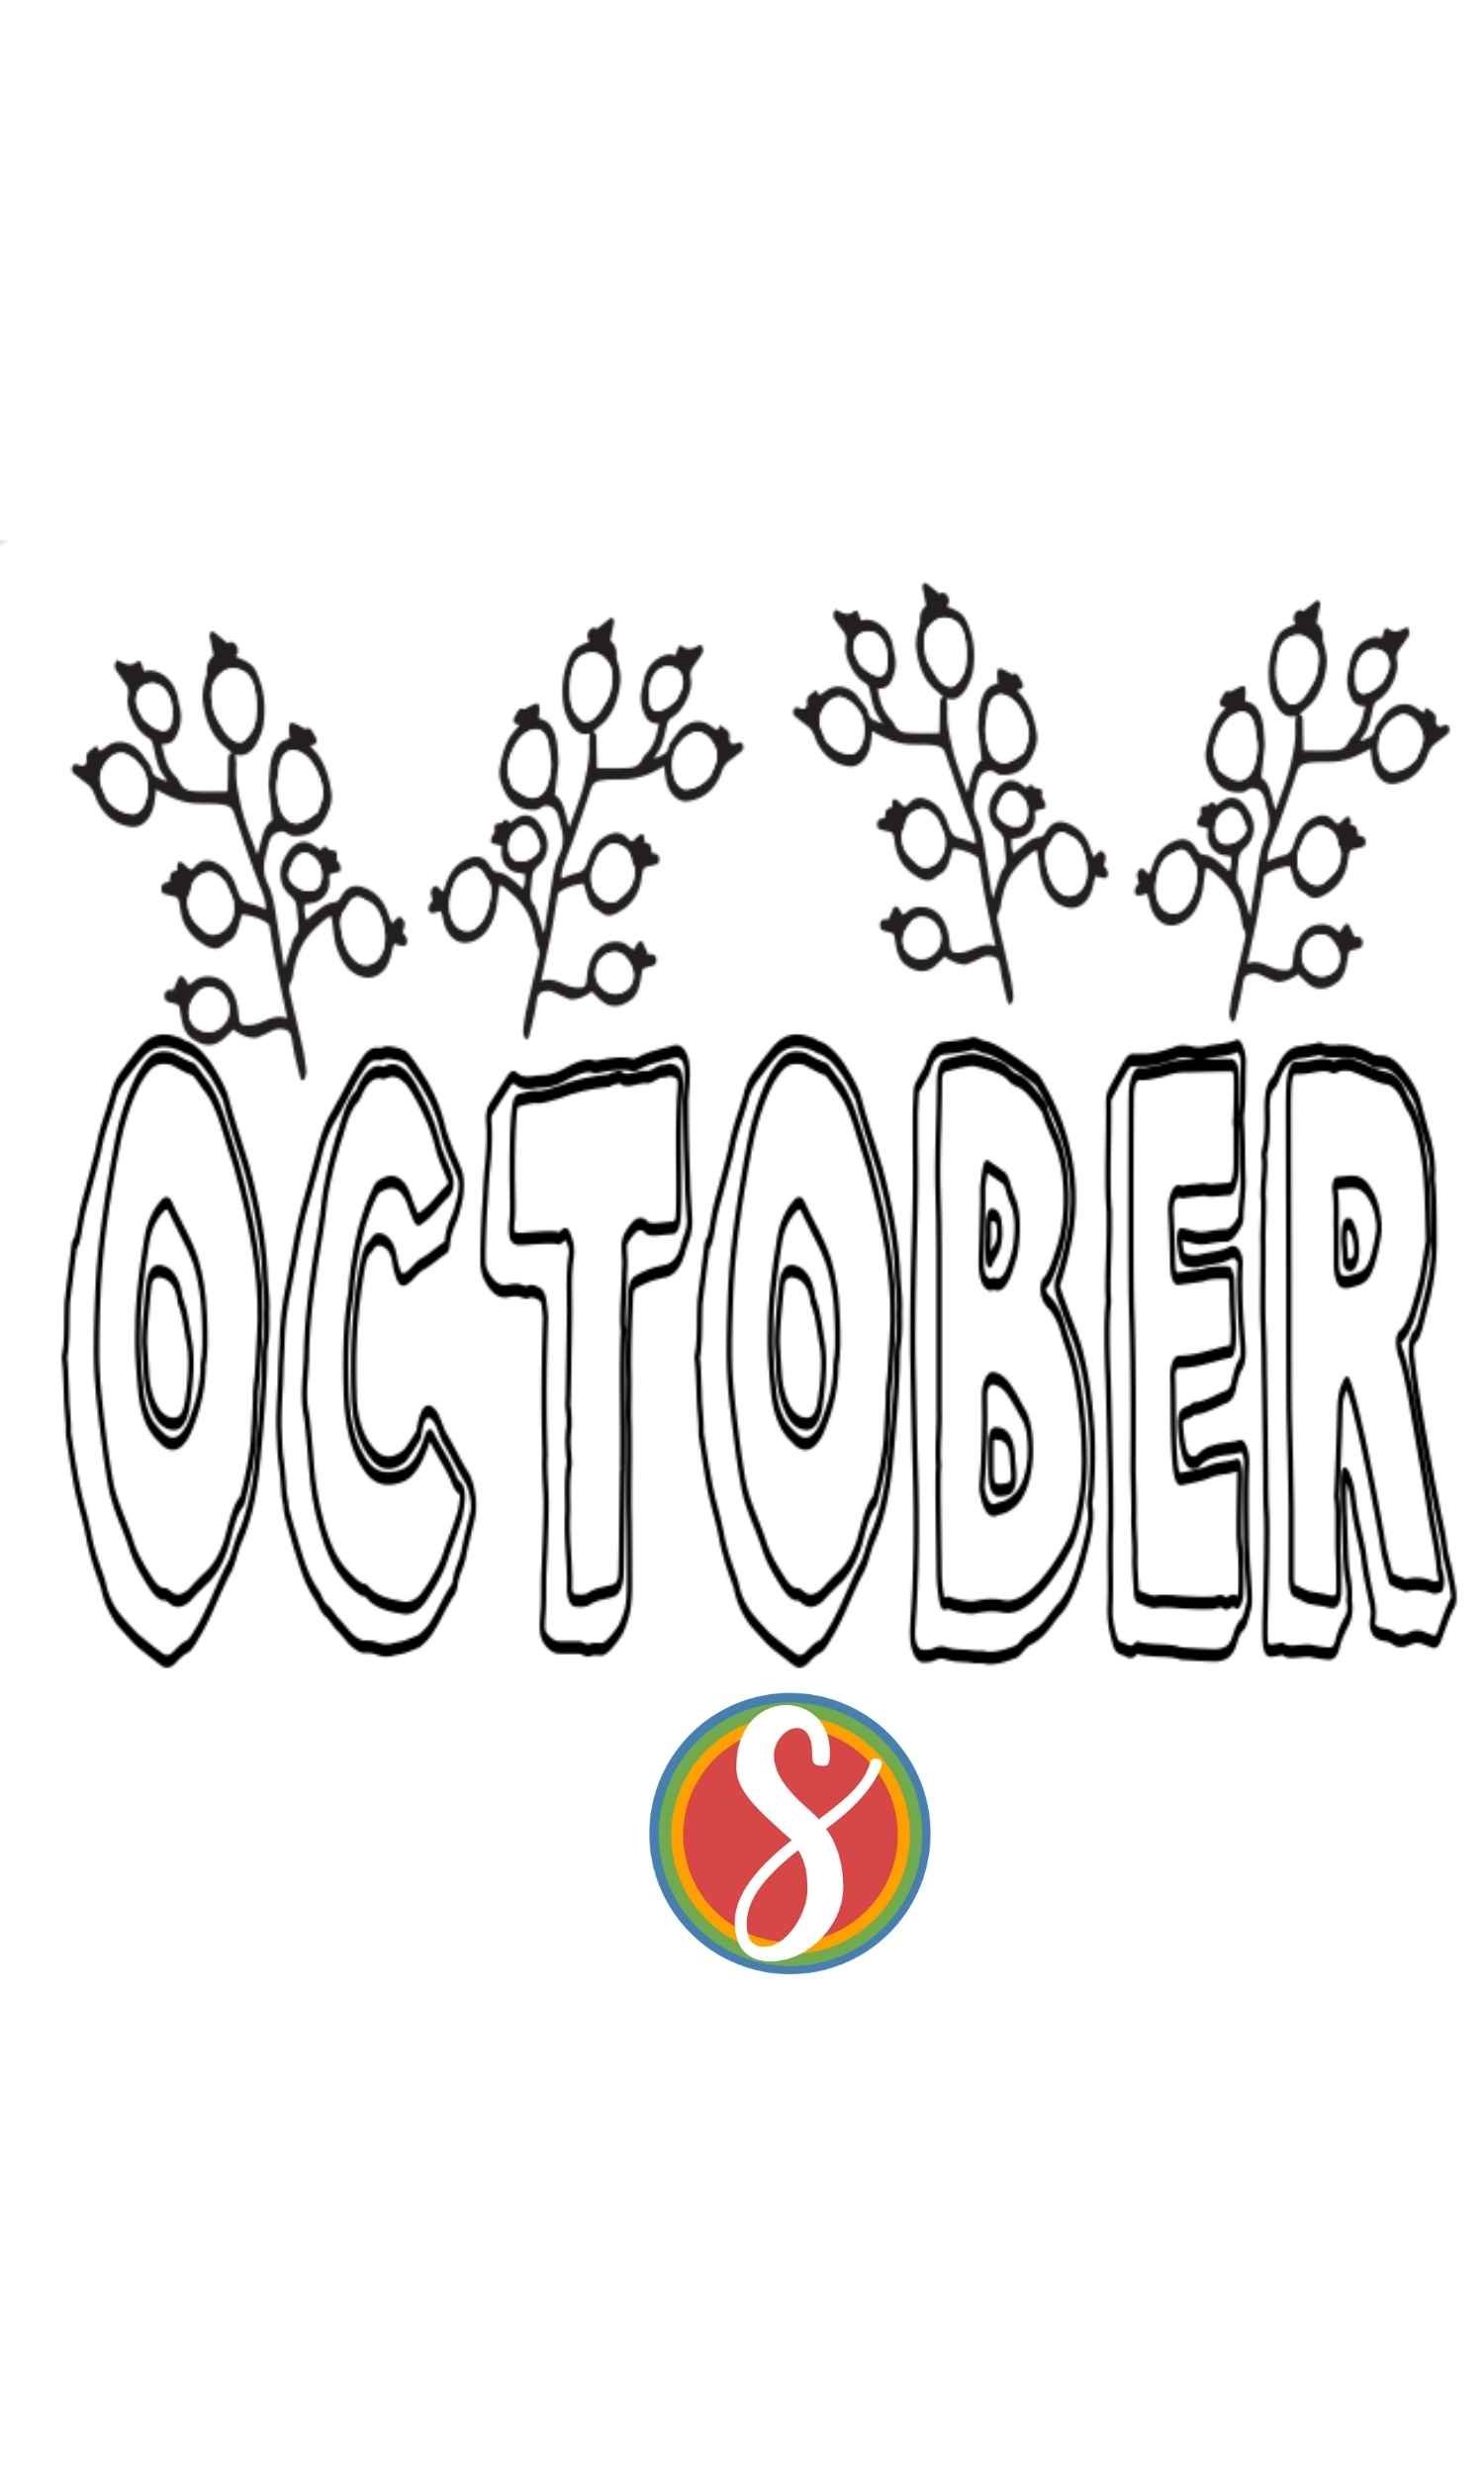 Free october coloring pages â stevie doodles